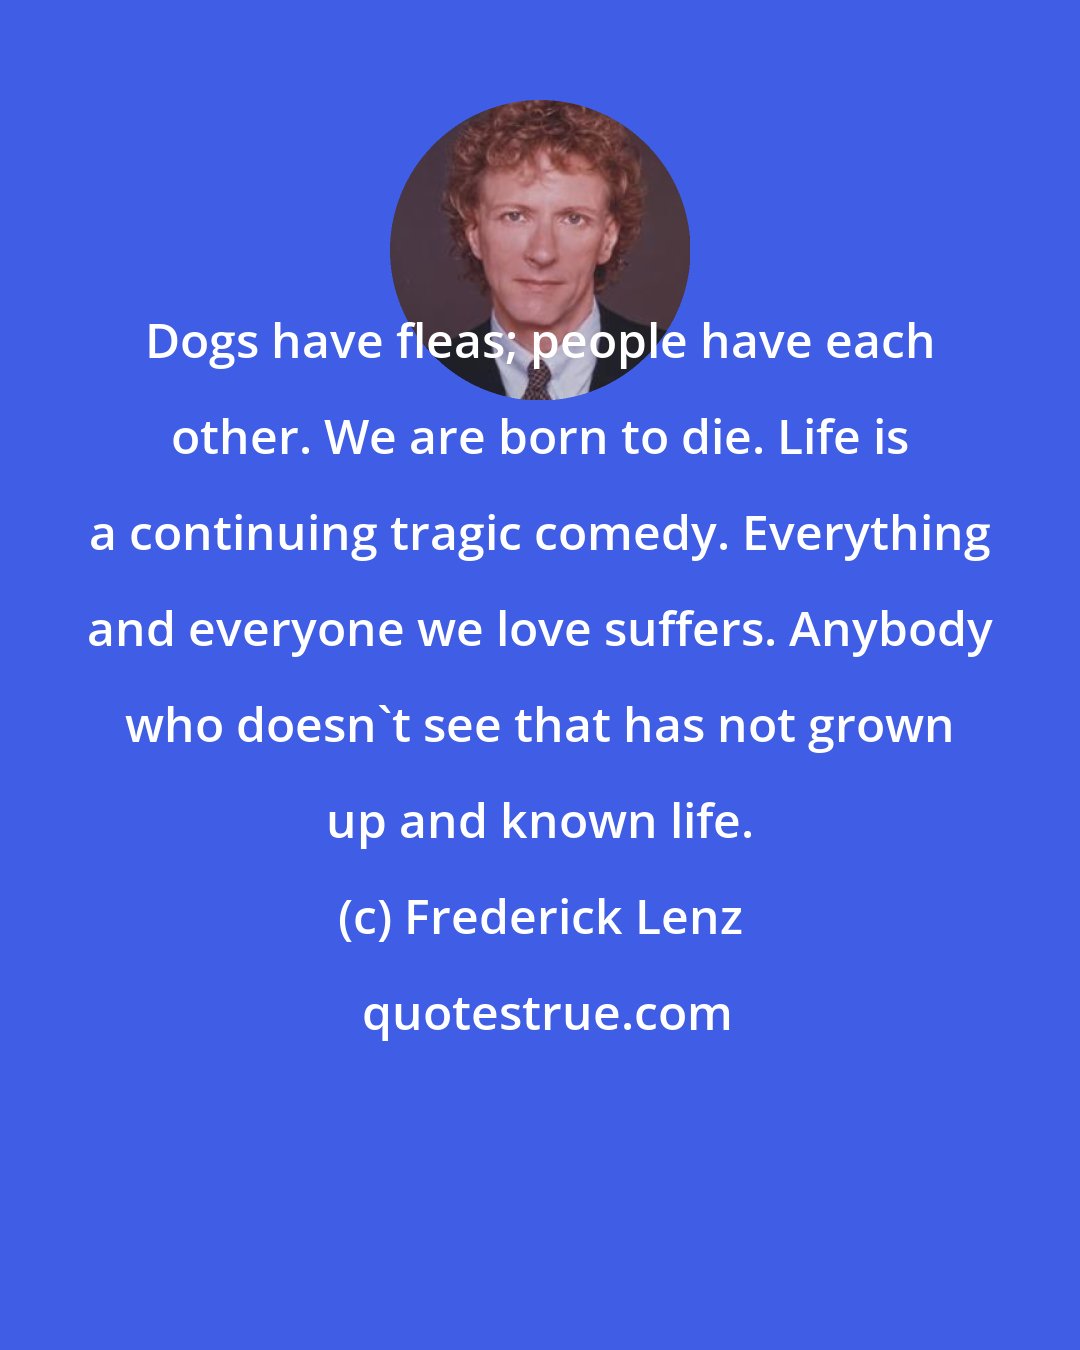 Frederick Lenz: Dogs have fleas; people have each other. We are born to die. Life is a continuing tragic comedy. Everything and everyone we love suffers. Anybody who doesn't see that has not grown up and known life.